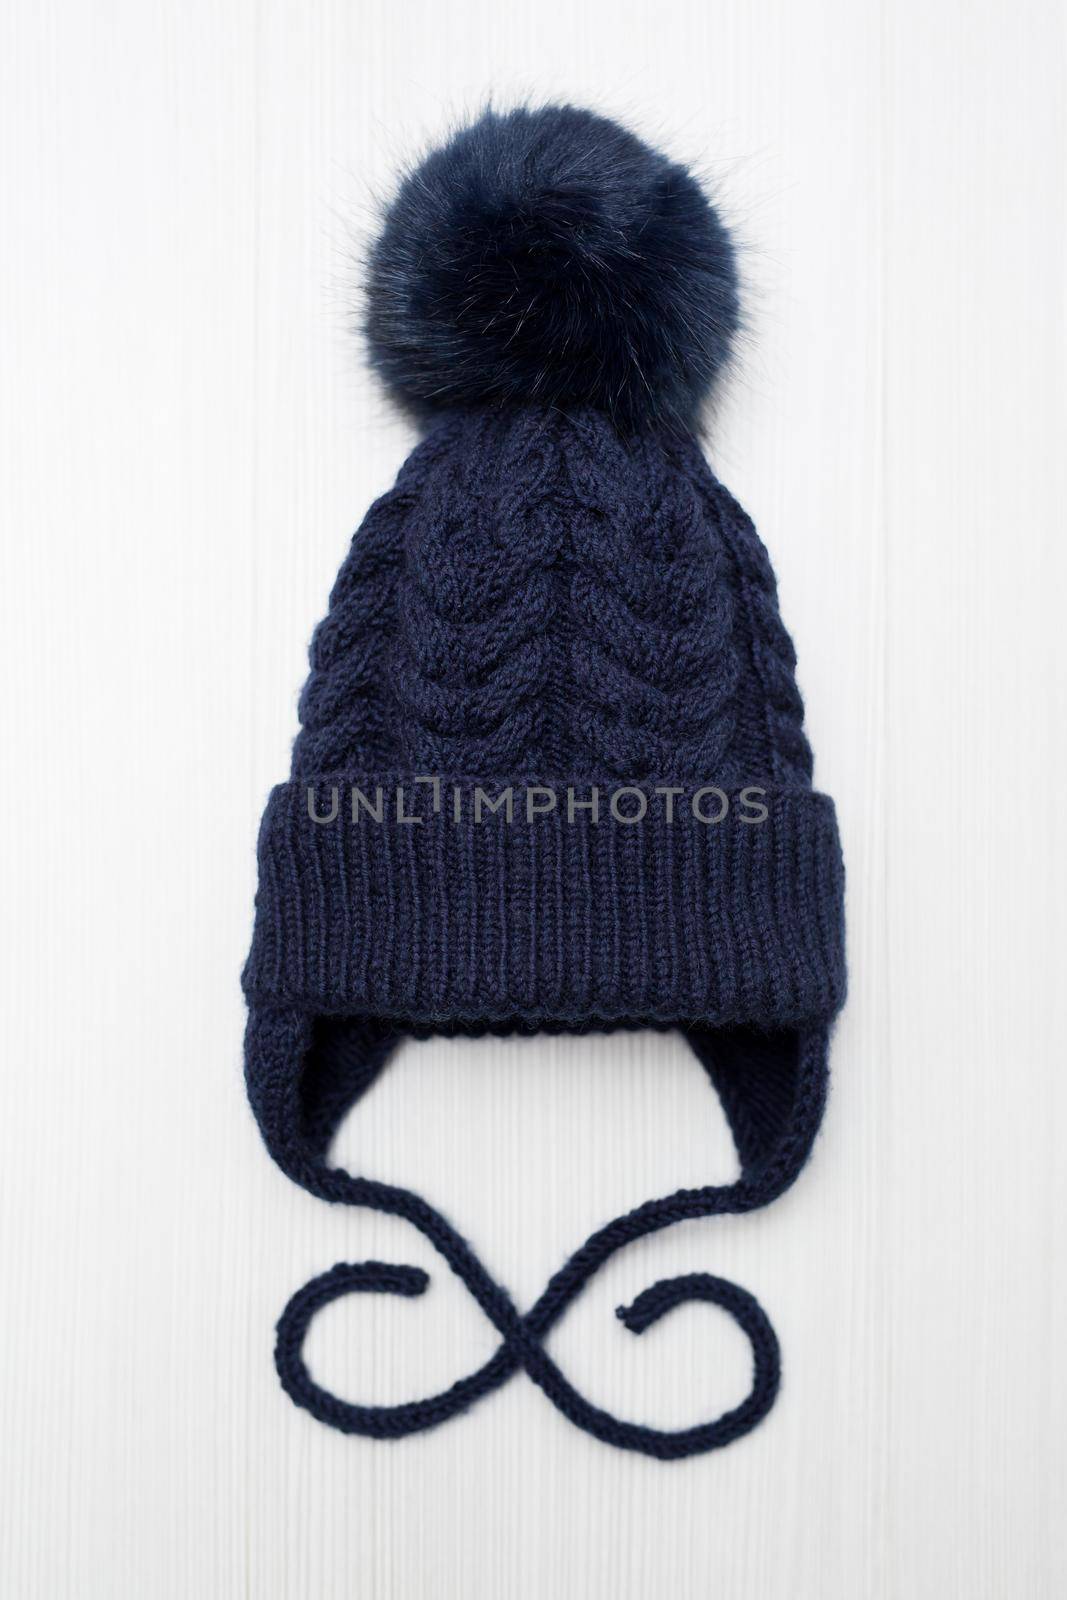 Children's knitted wool hat with a pompom, on a white background